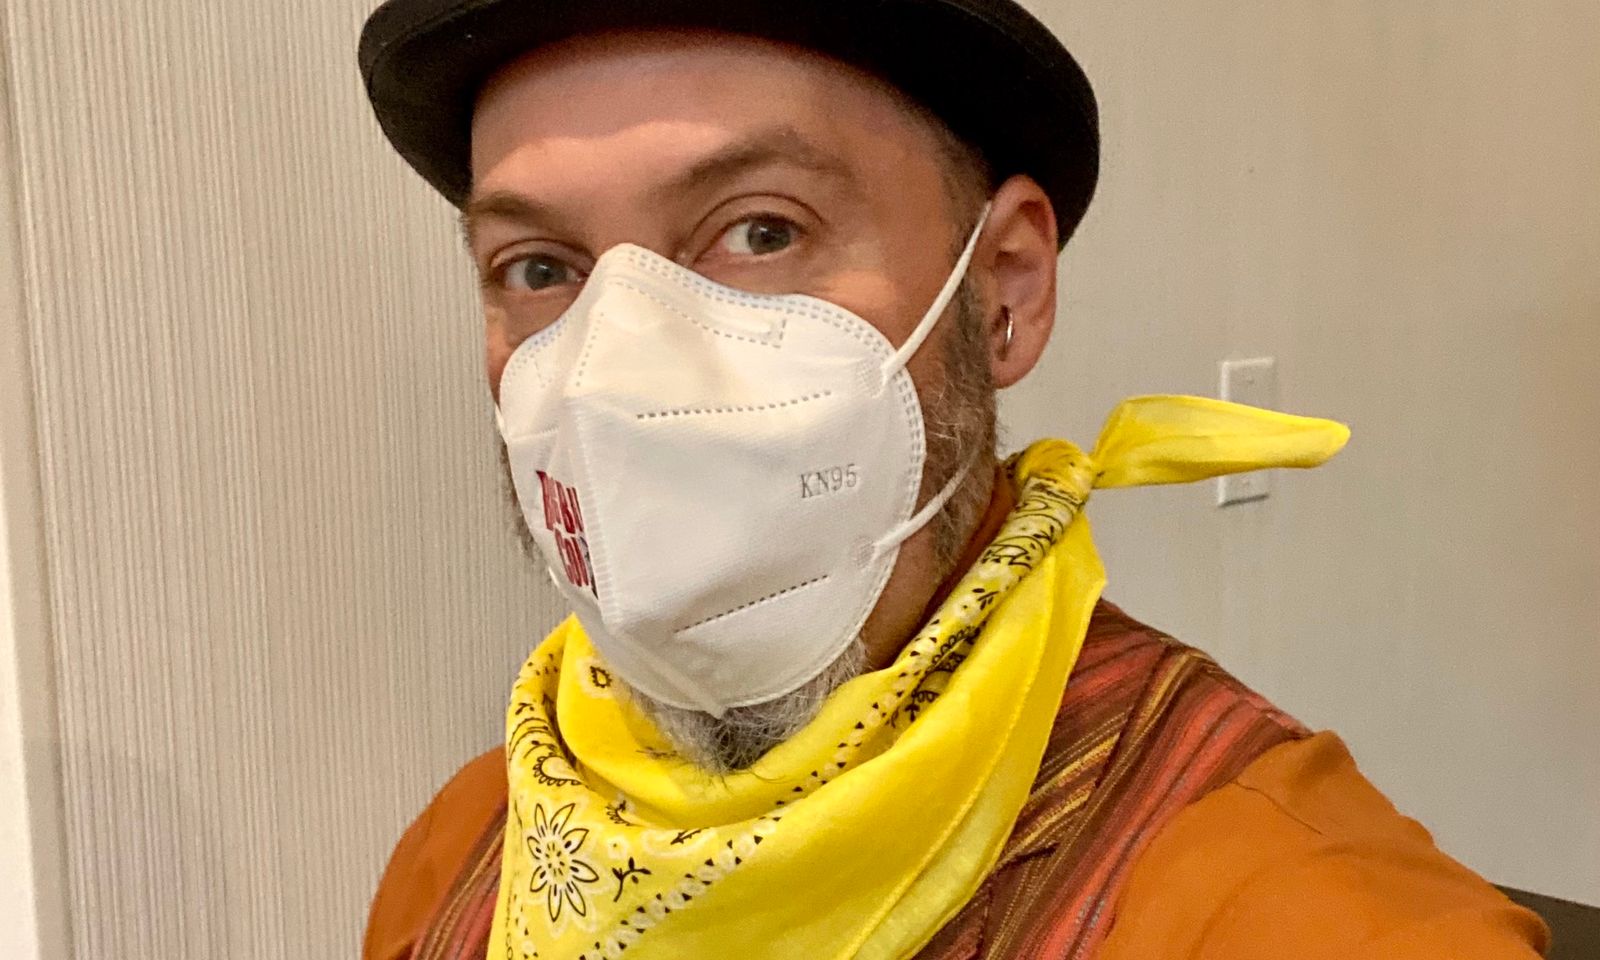 Me doing my Big Bad Con greeter shift, dressed snappy with a bowler, vest, tie, my yellow Ranger bandana, and a N95 mask.